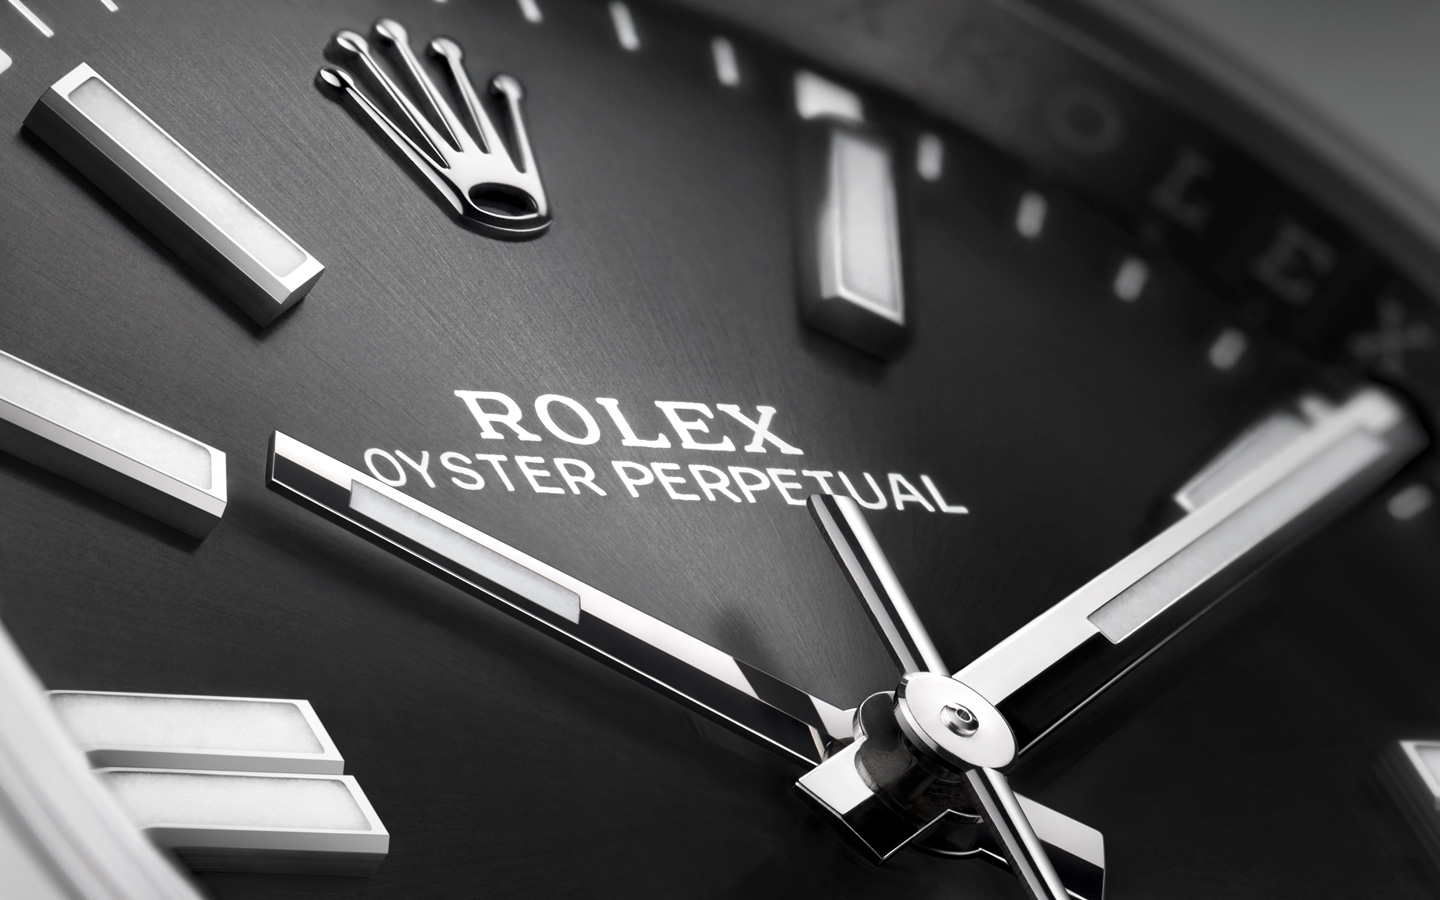 Rolex Oyster Perpetual watch at Goldfinger - Caribbean watches